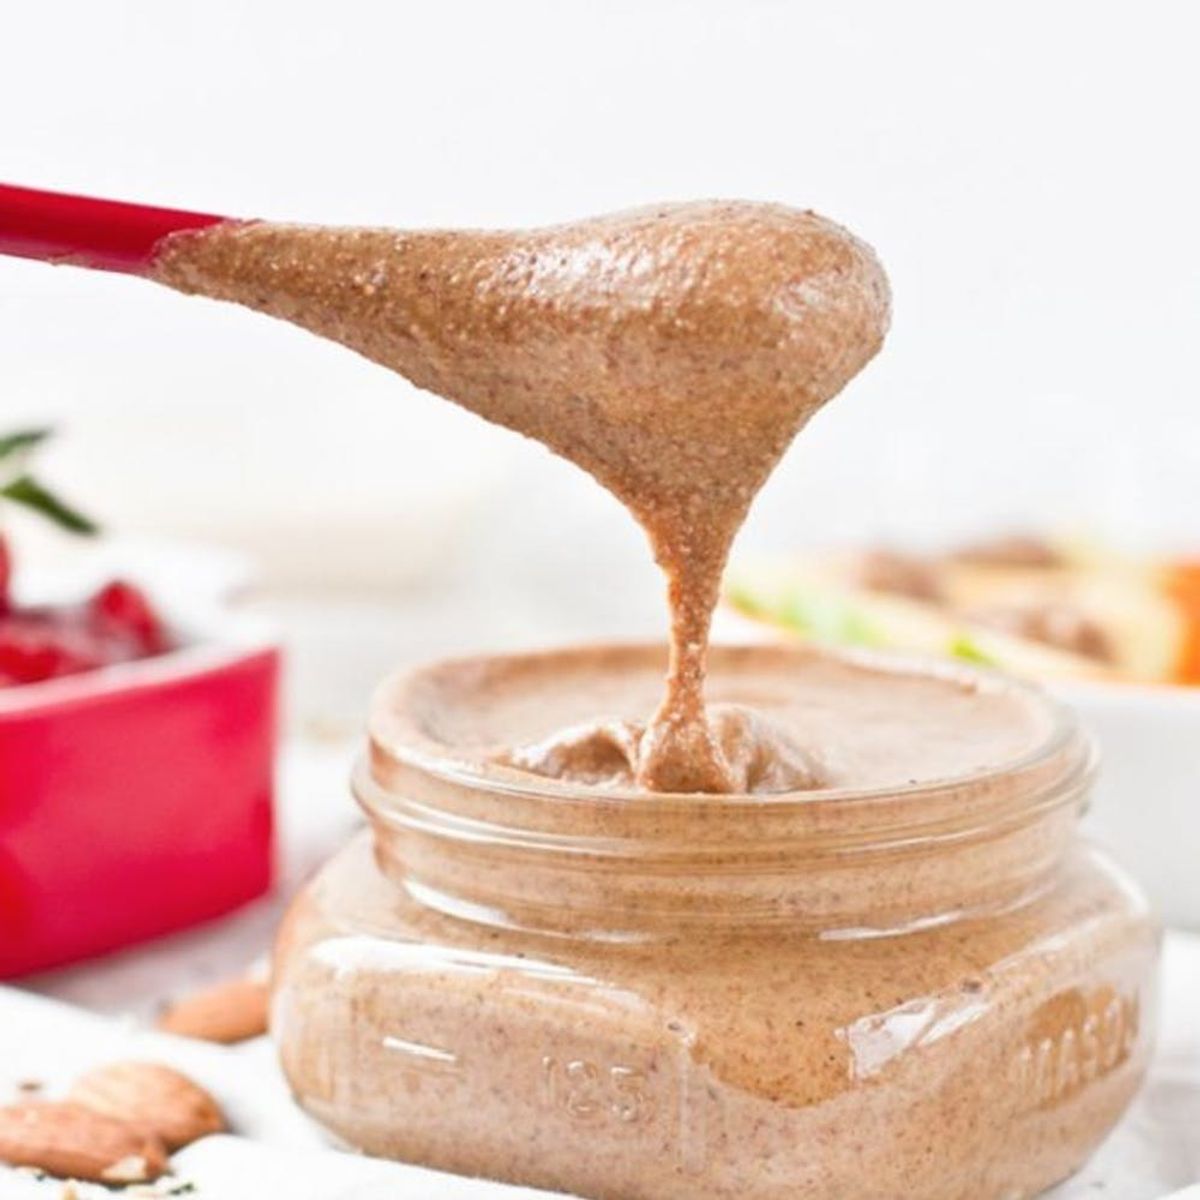 12 Awesome Homemade Nut Butters to Put on *Everything*